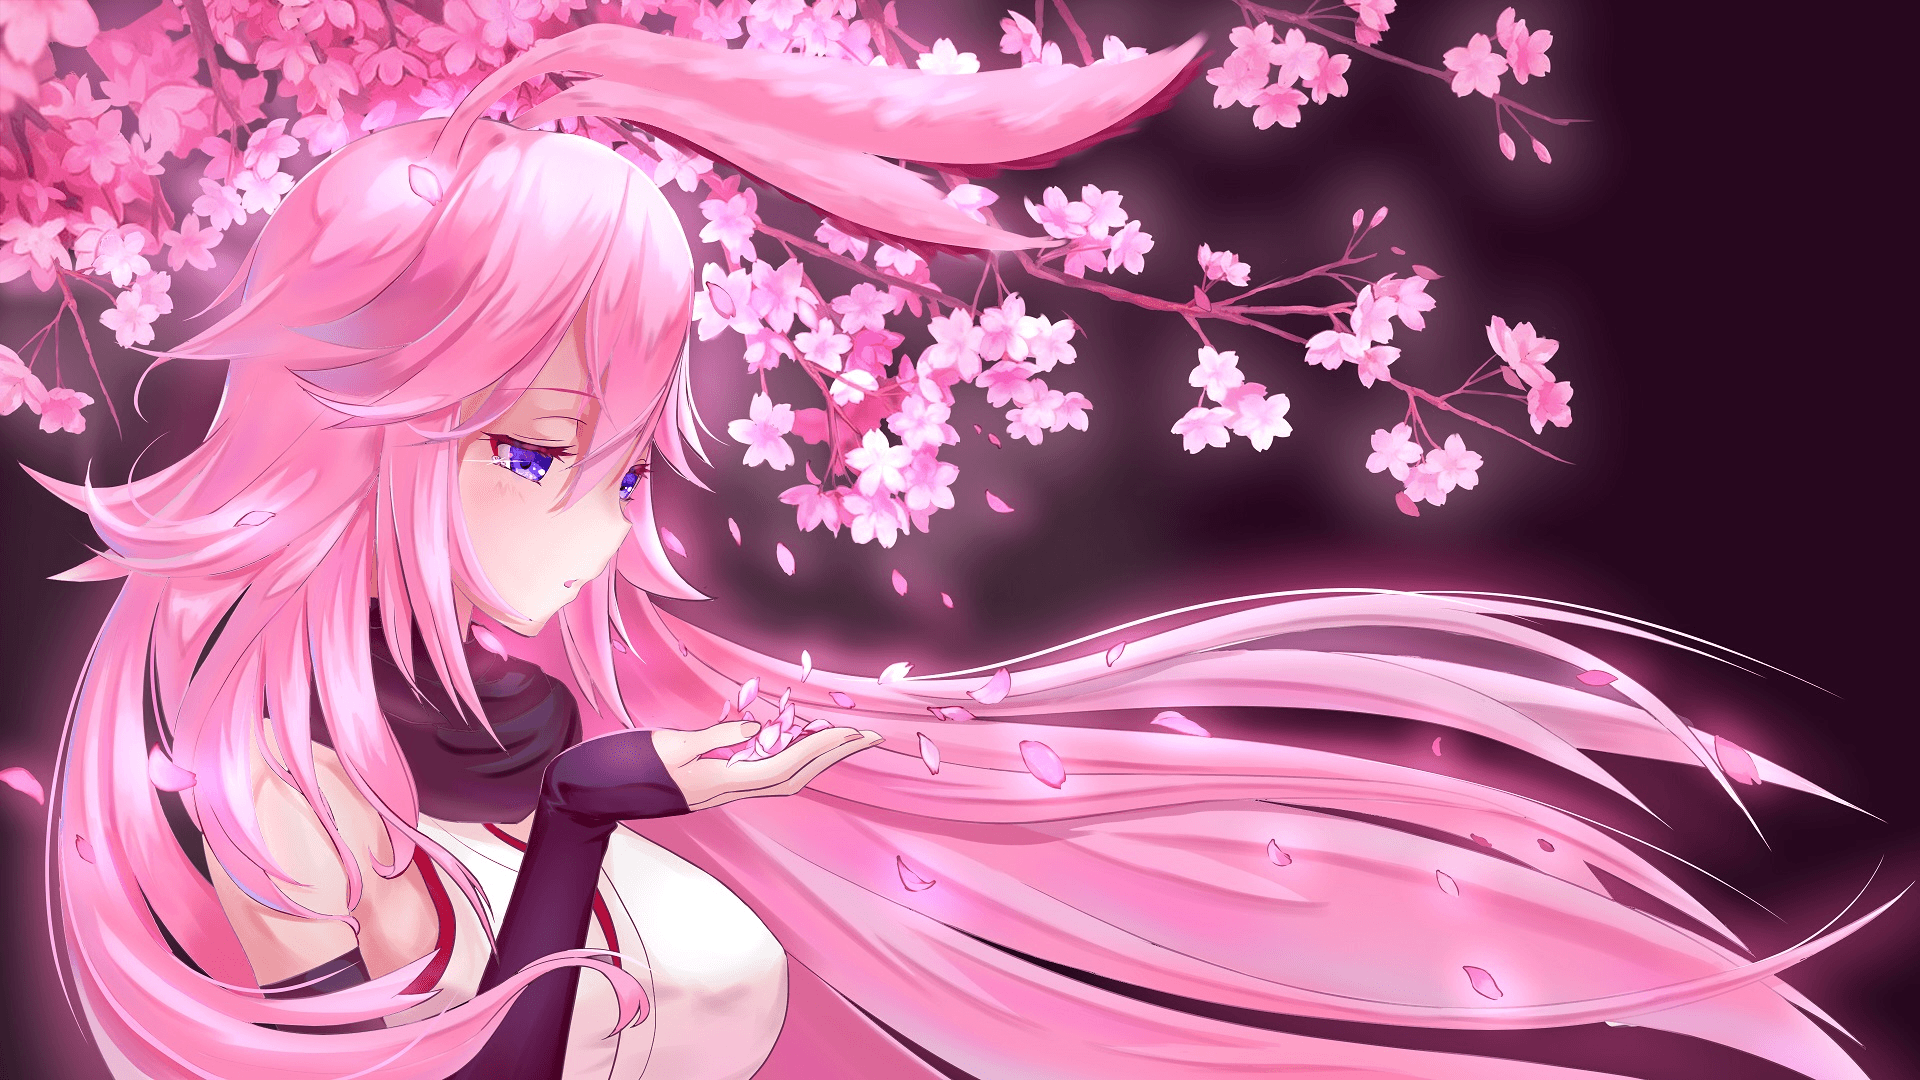 Pink And Black Anime Wallpapers Top Free Pink And Black Anime Backgrounds Wallpaperaccess 